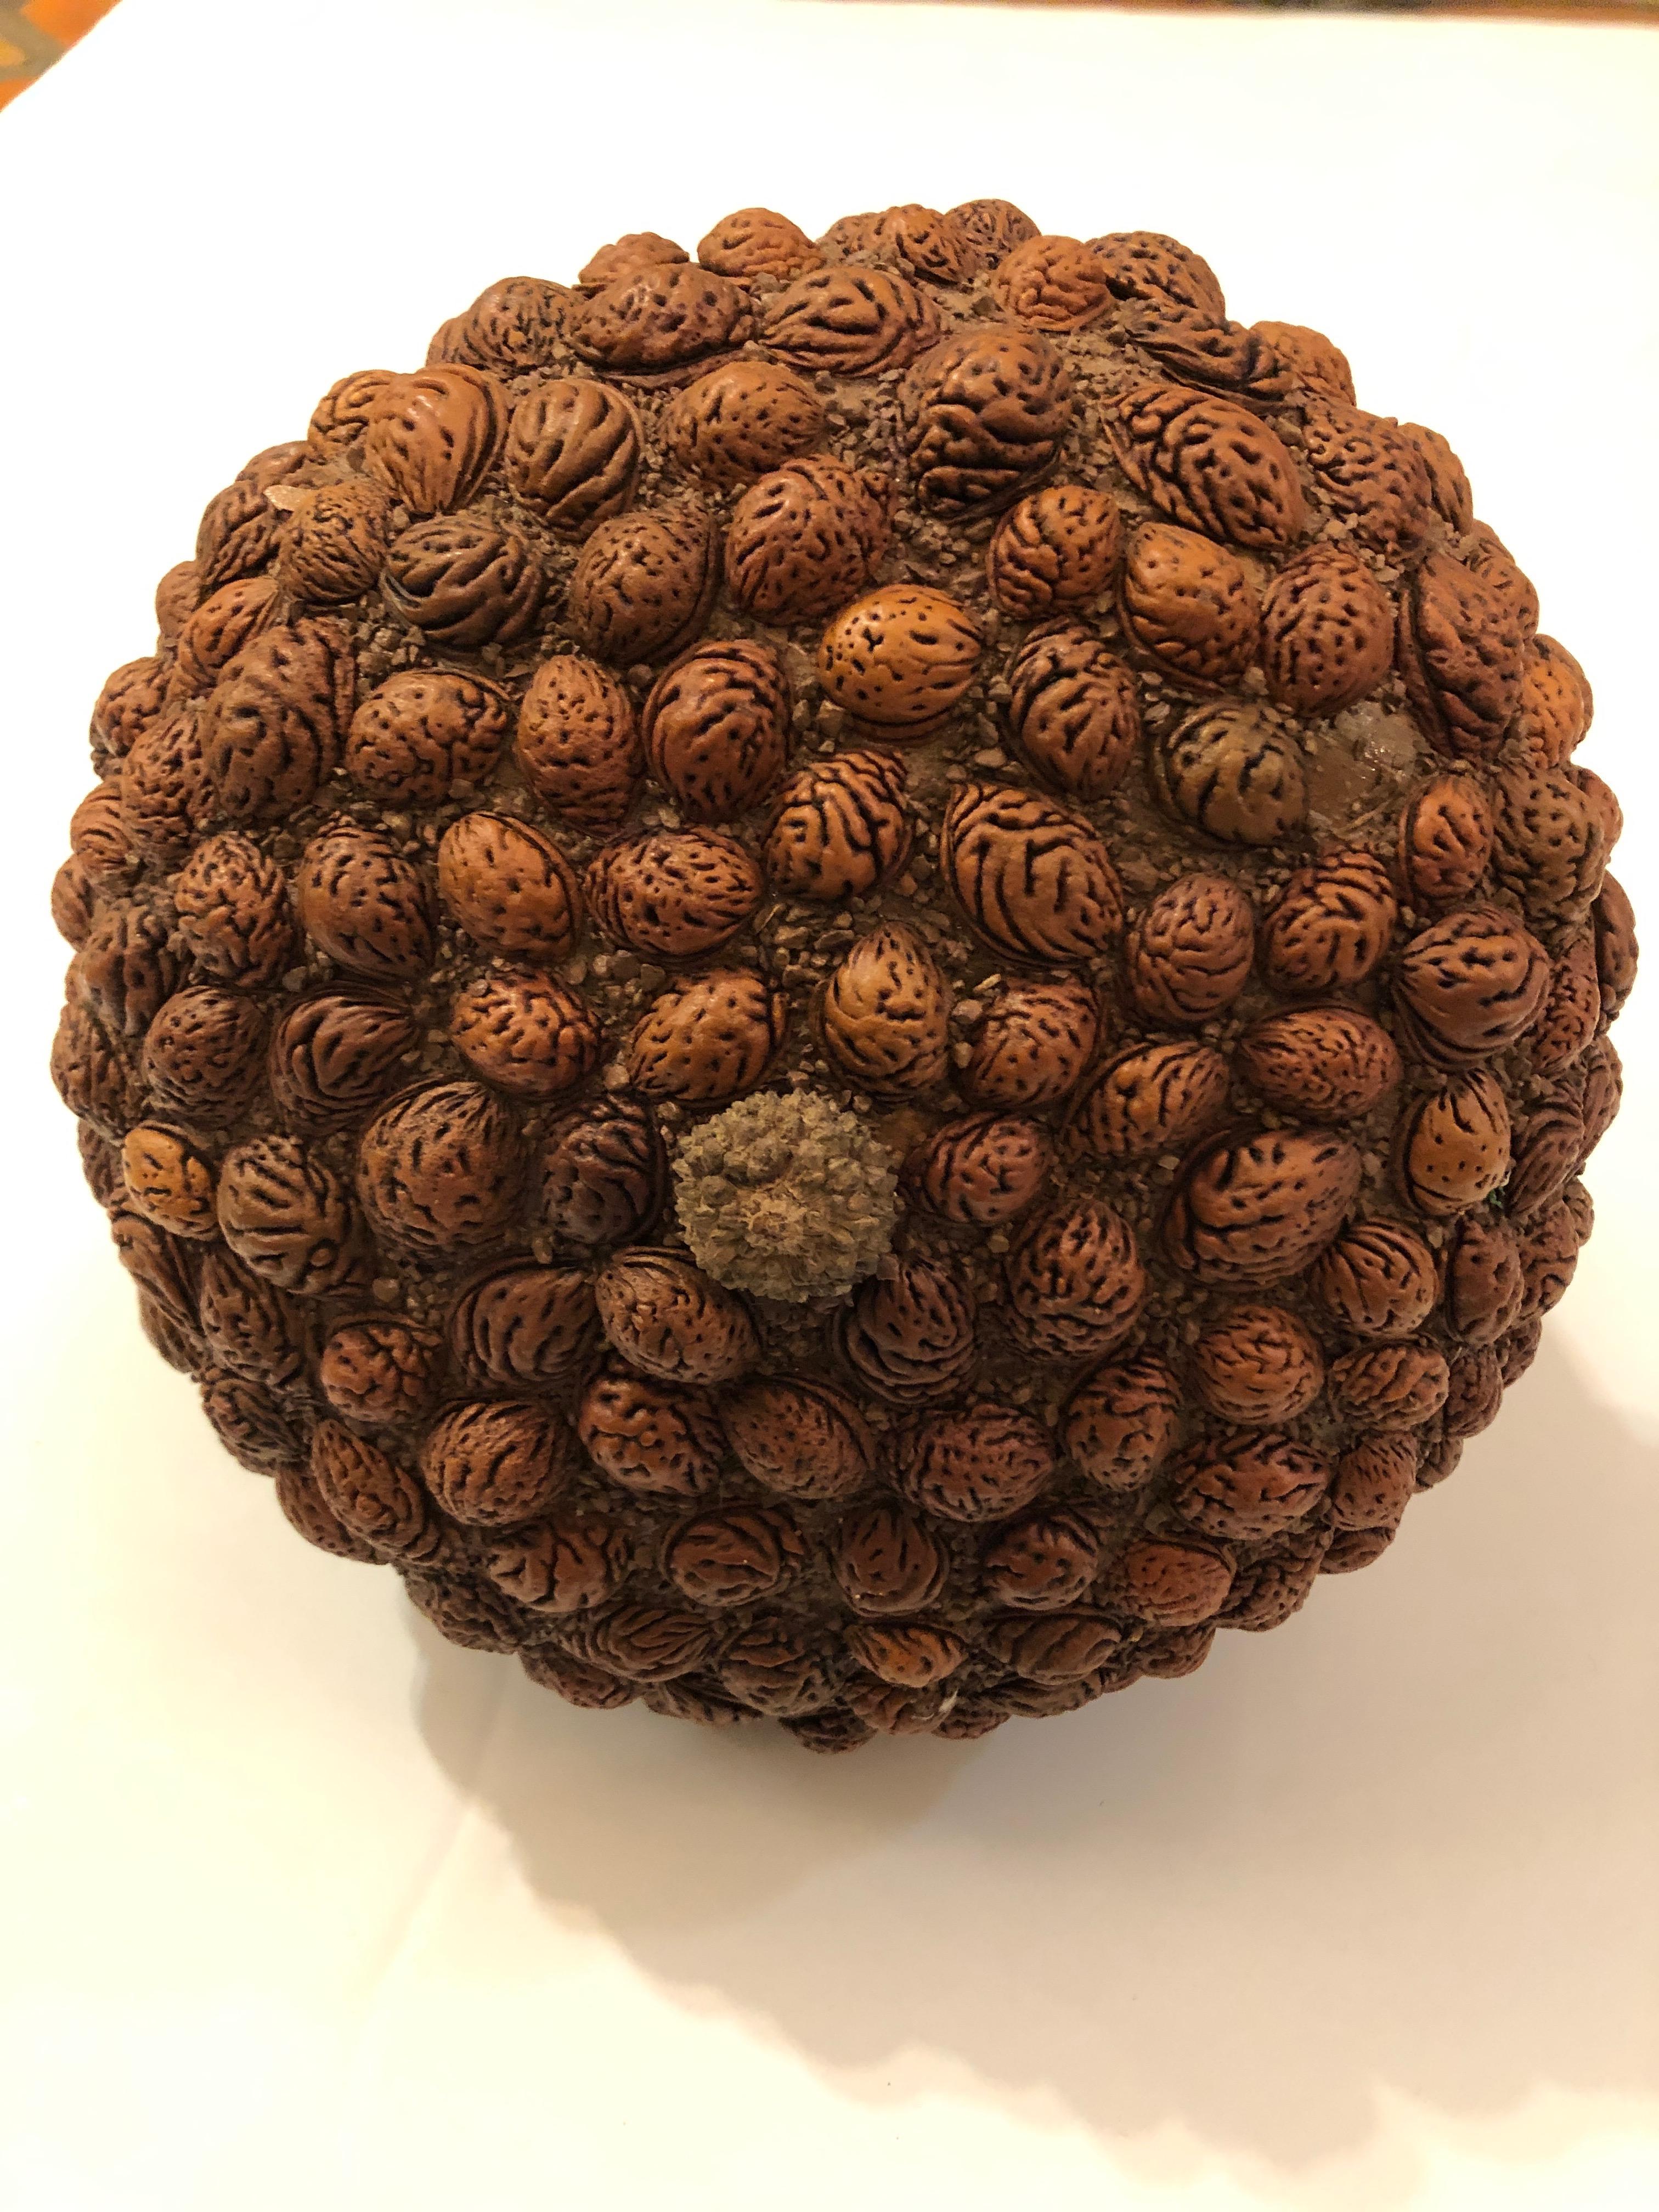 Arts and Crafts Organic Handmade Acorn Sculpture from Organic Material